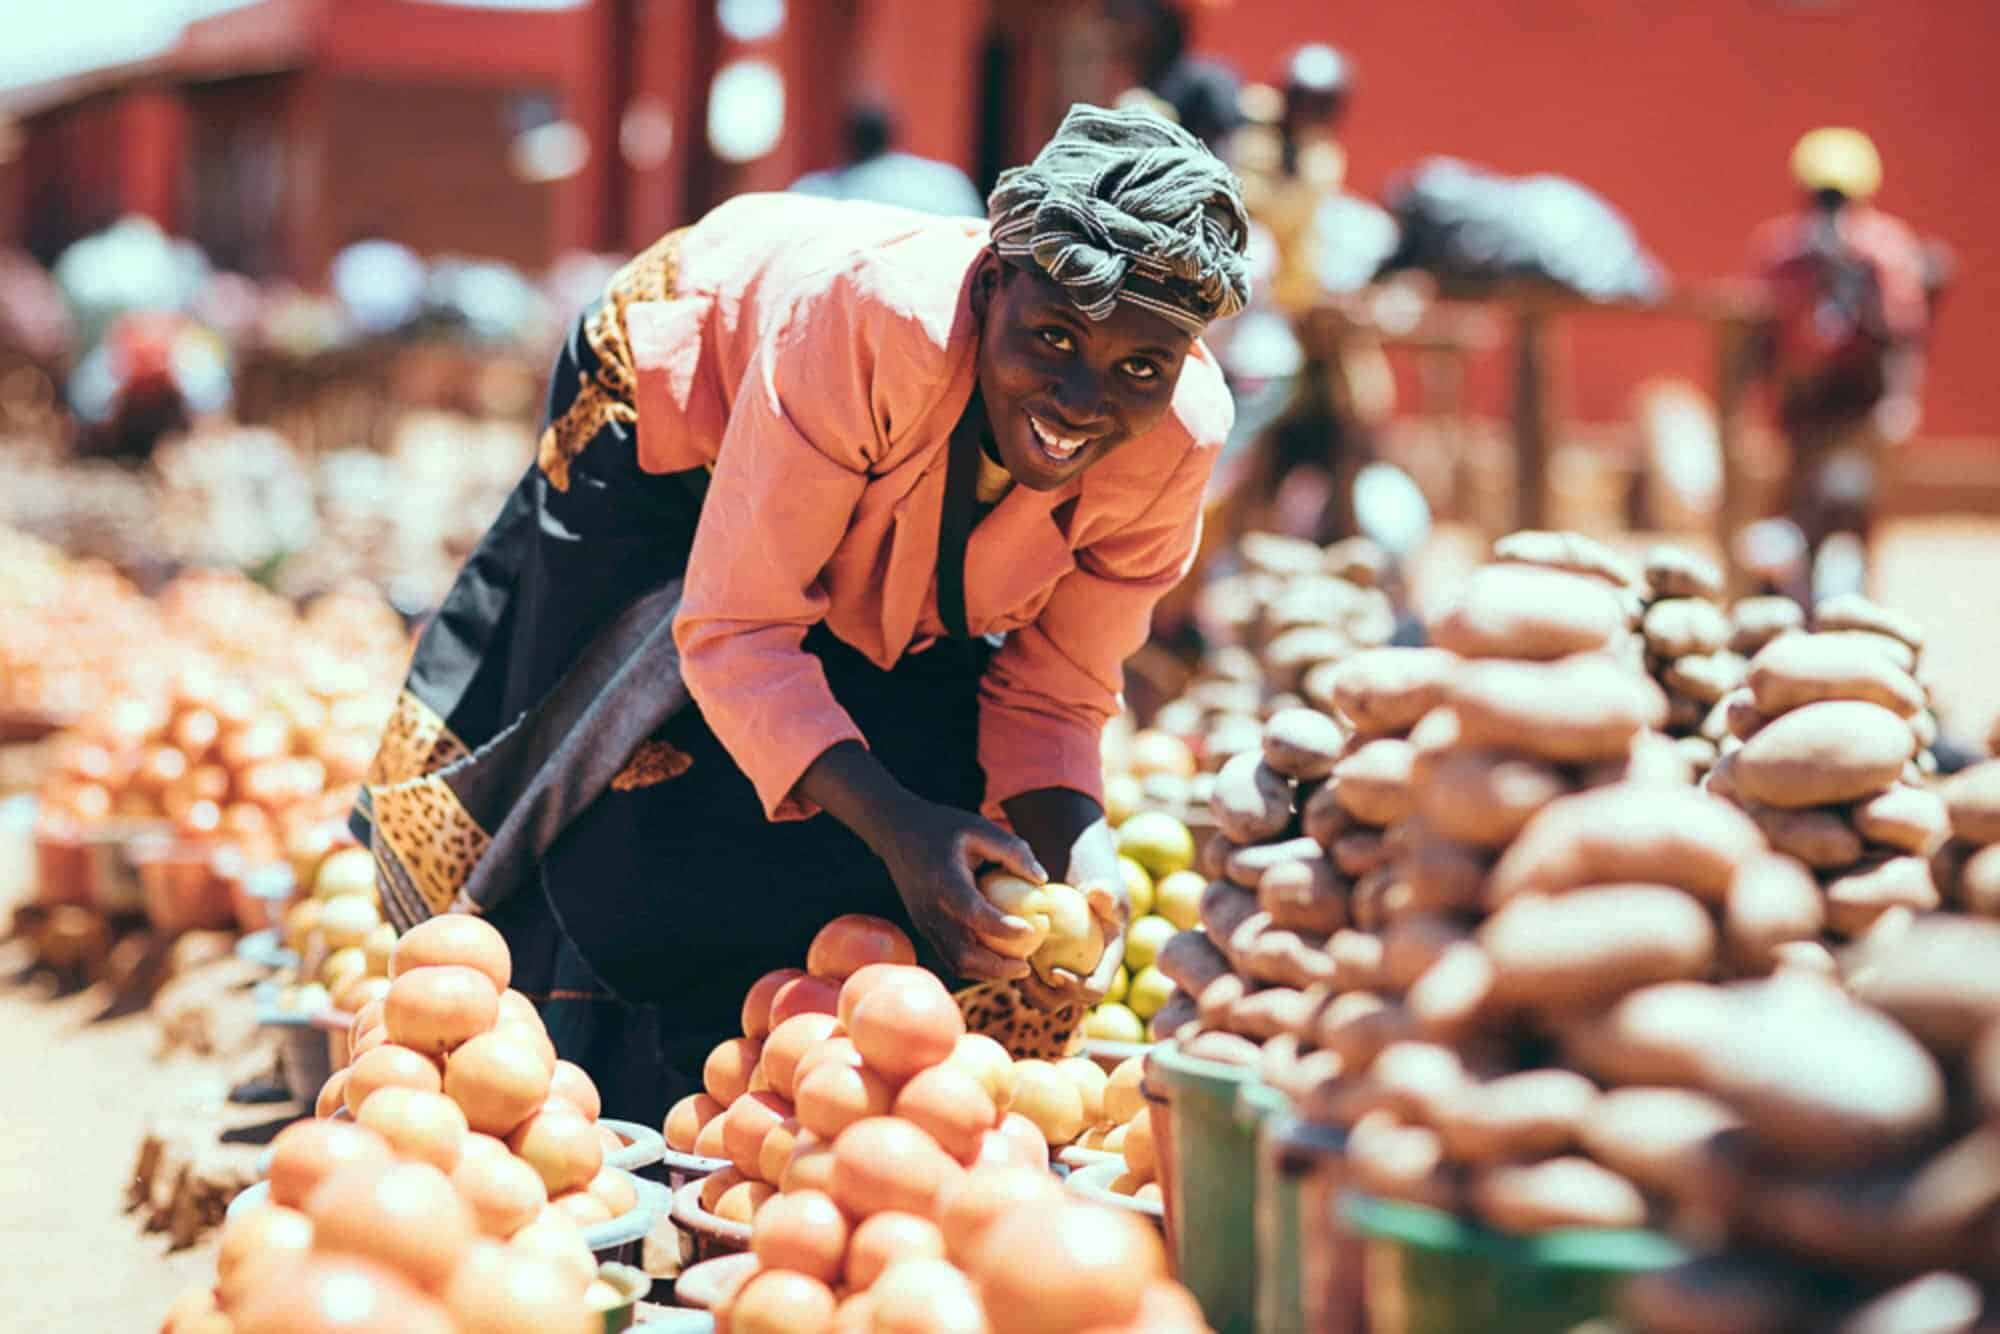 Woman smiling over her produce in the market